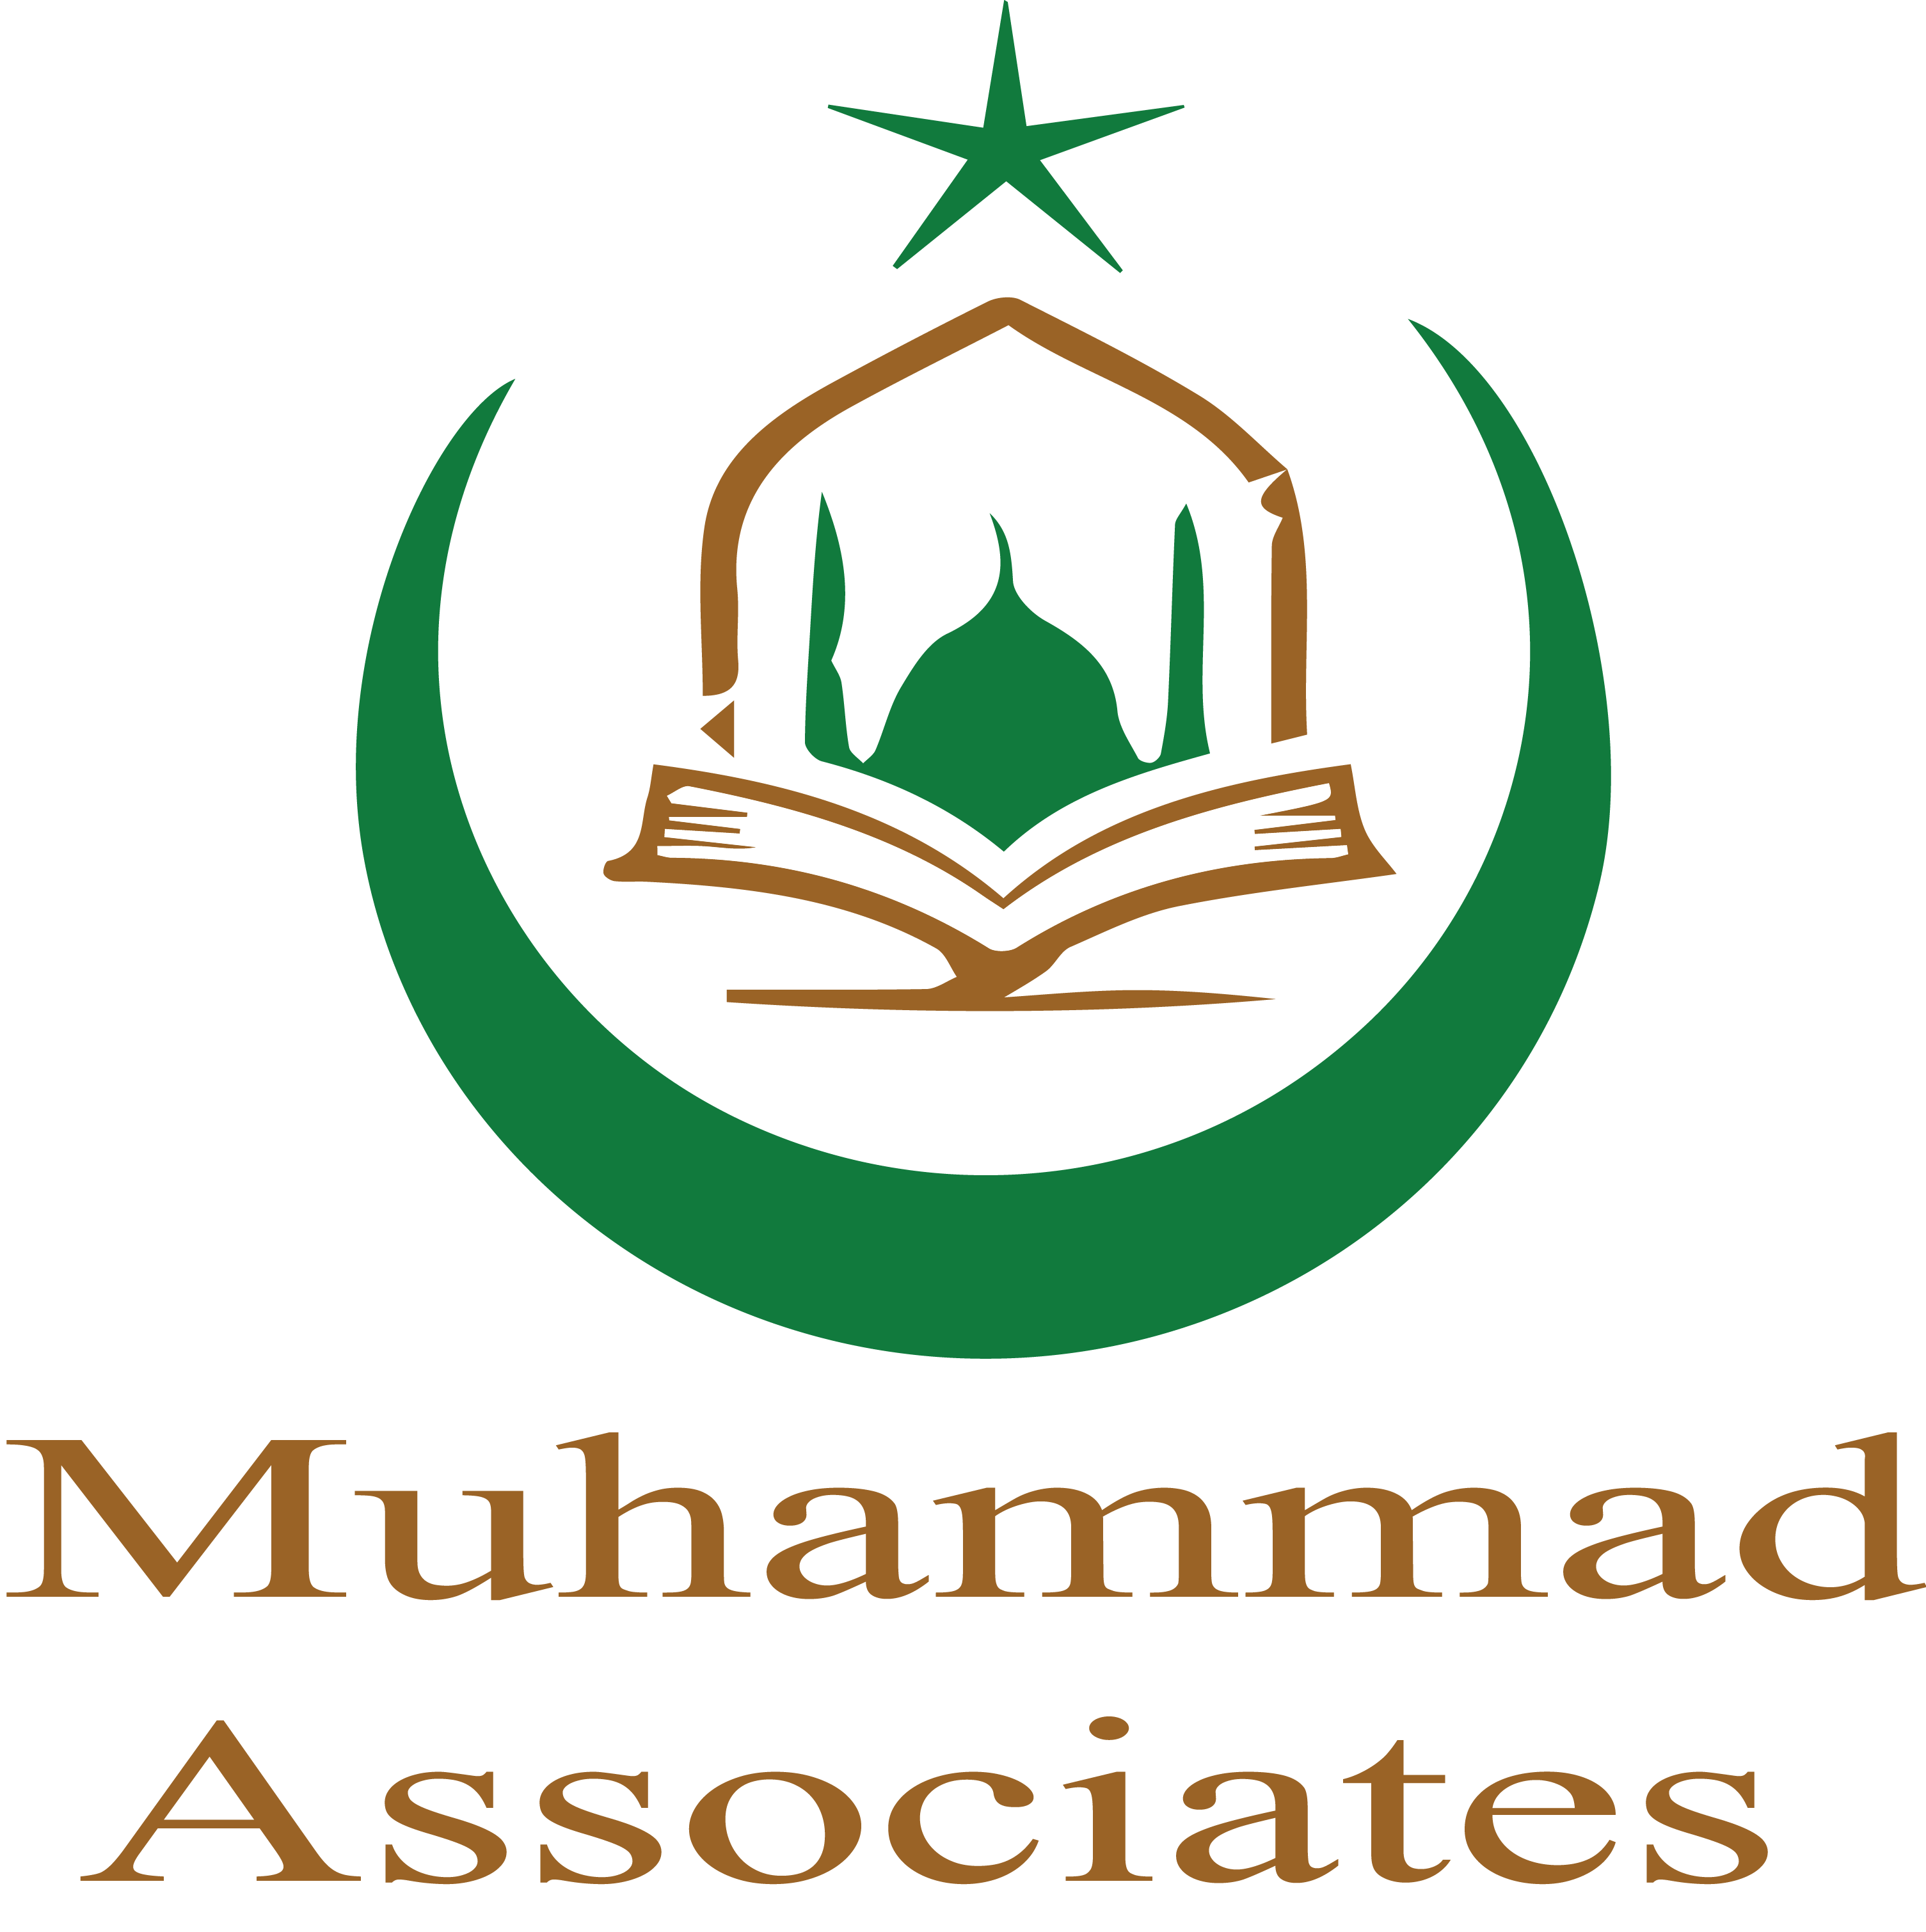 https://www.pakpositions.com/company/muhammad-associates-private-limited